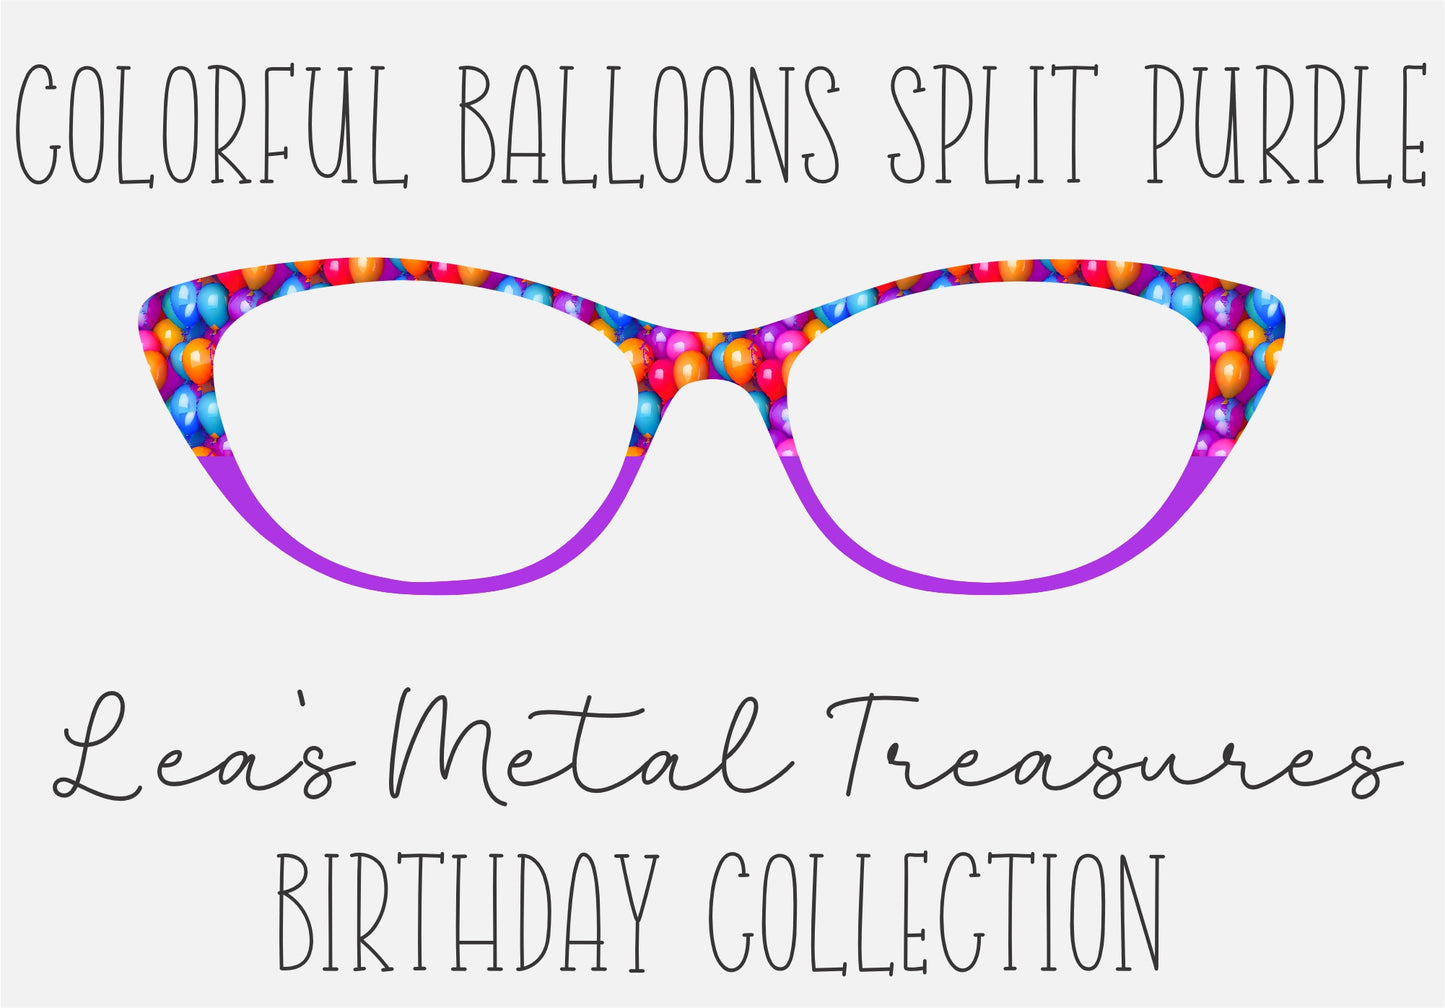 COLORFUL BALLOONS SPLIT PURPLE Eyewear Frame Toppers COMES WITH MAGNETS